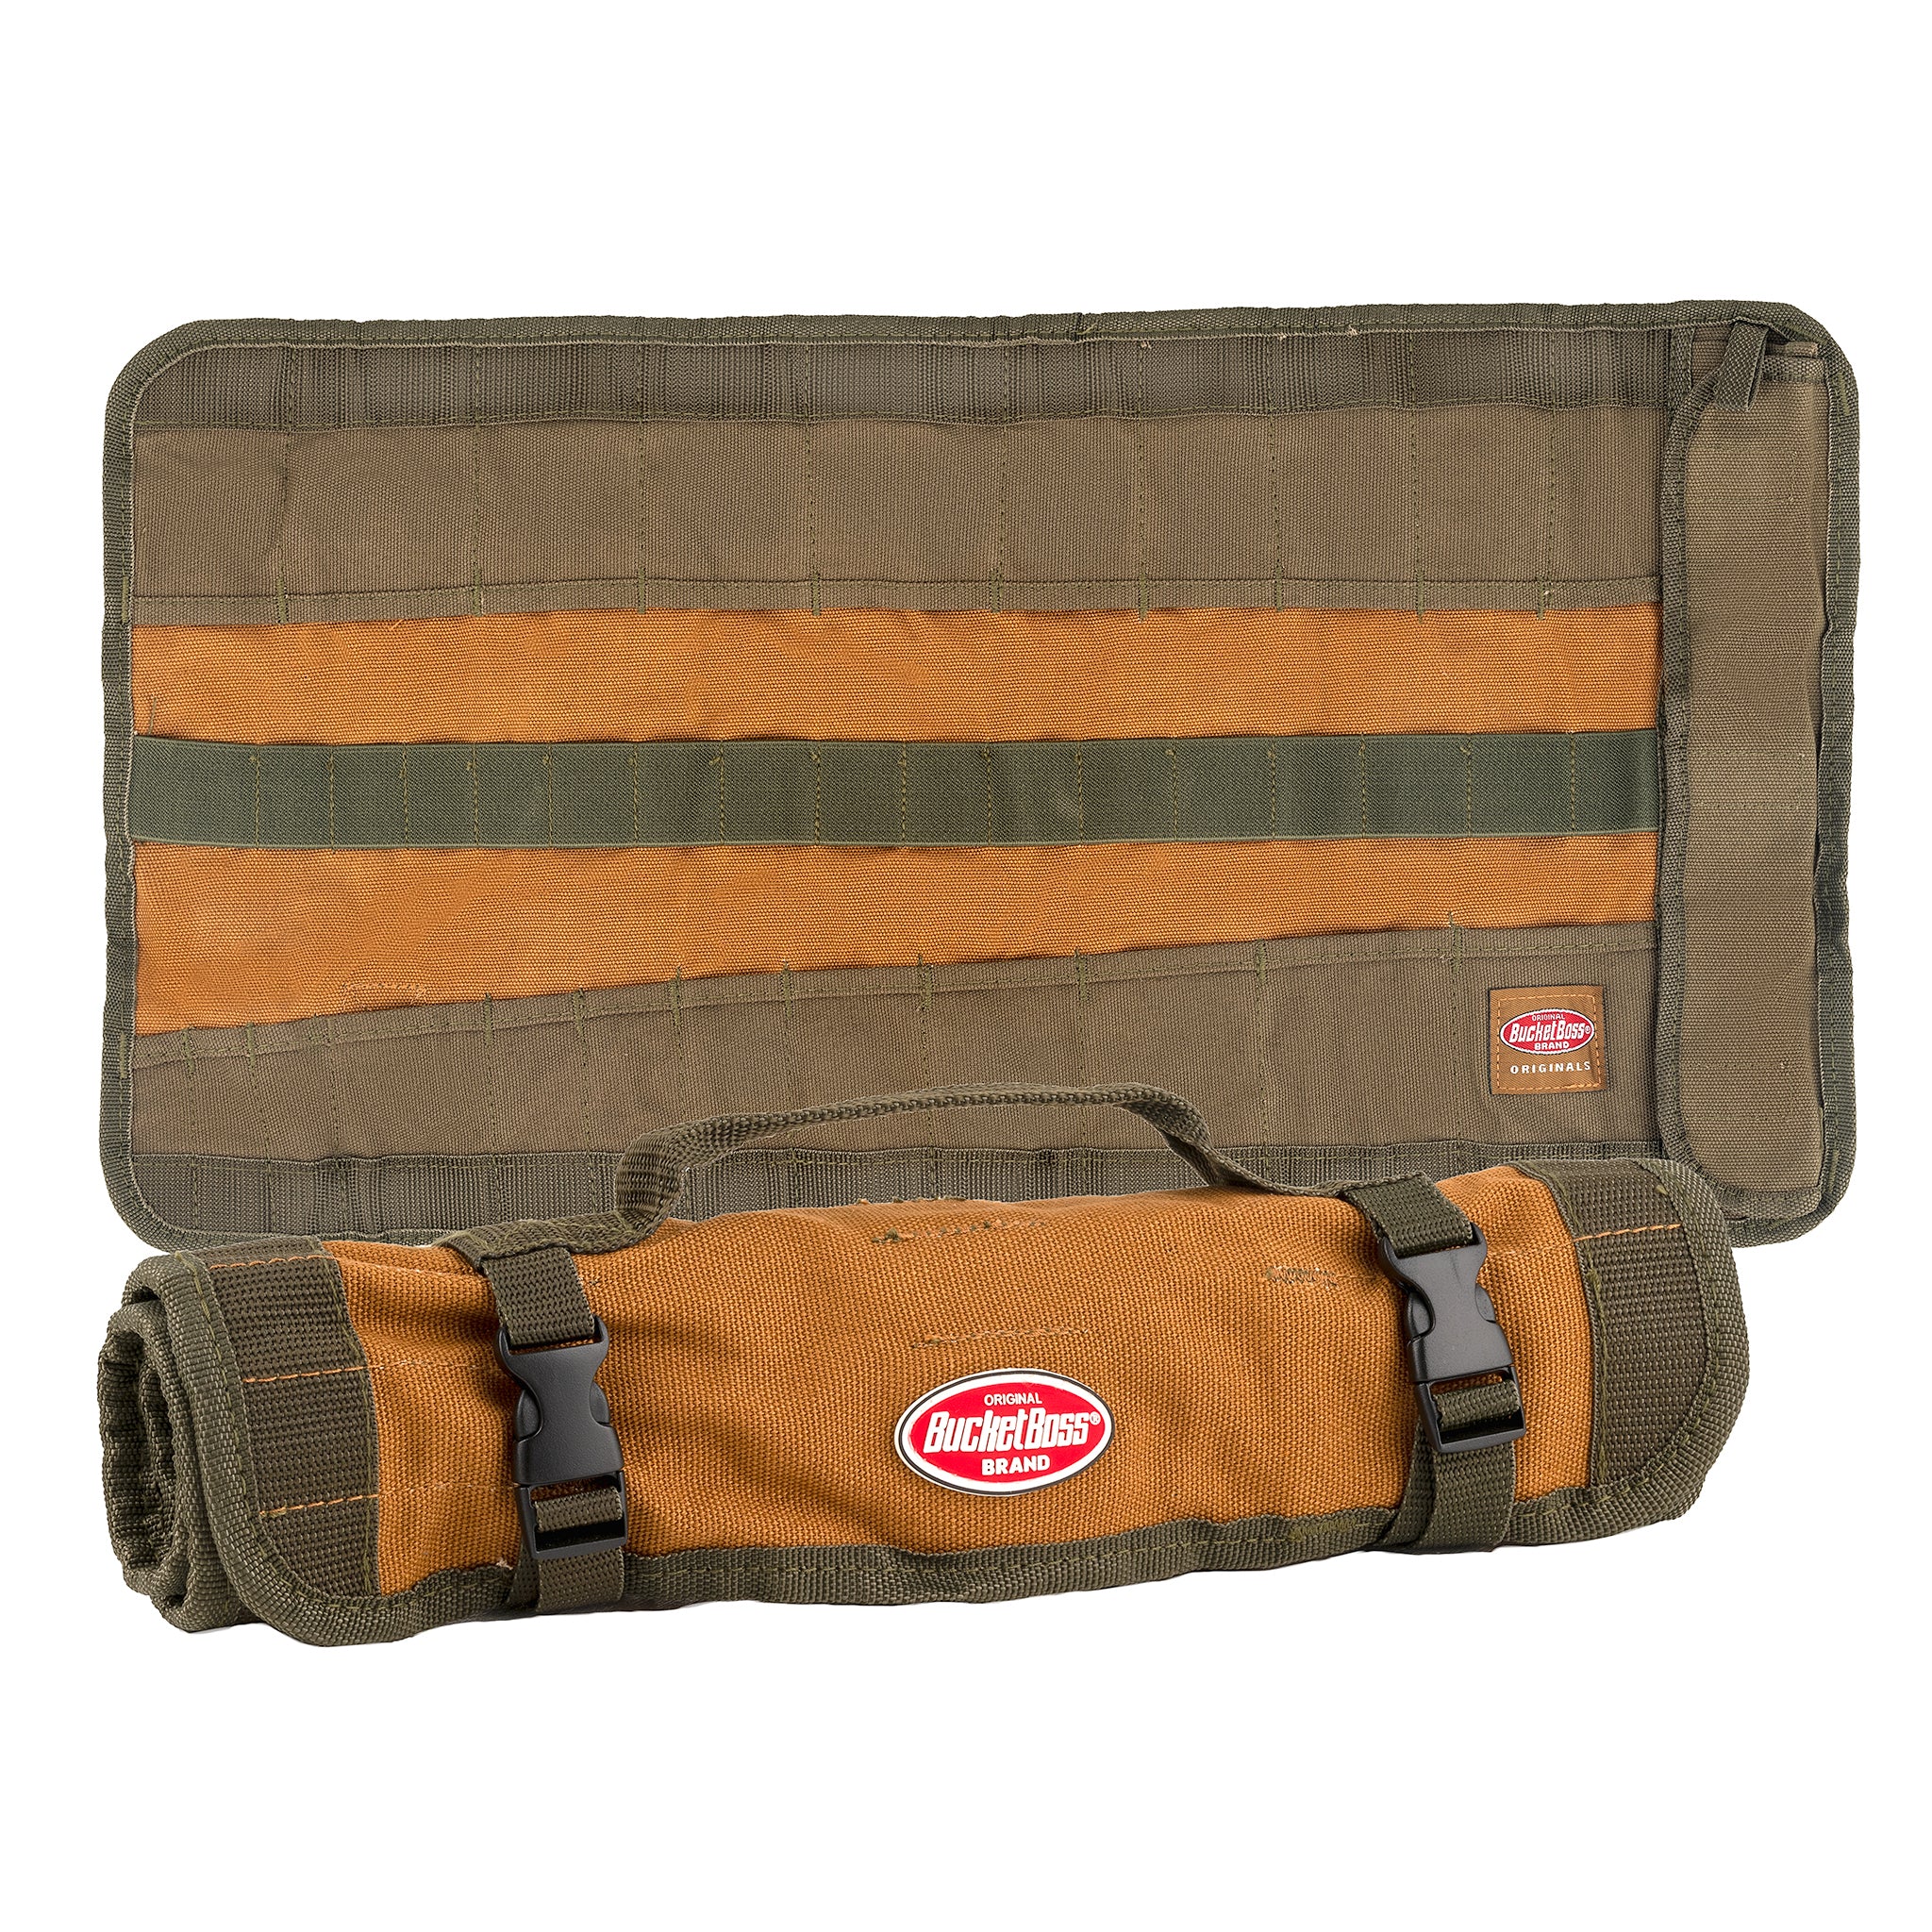 Super Tool Roll, Large Wrench Roll, Big Tool Roll Up Bag, Canvas